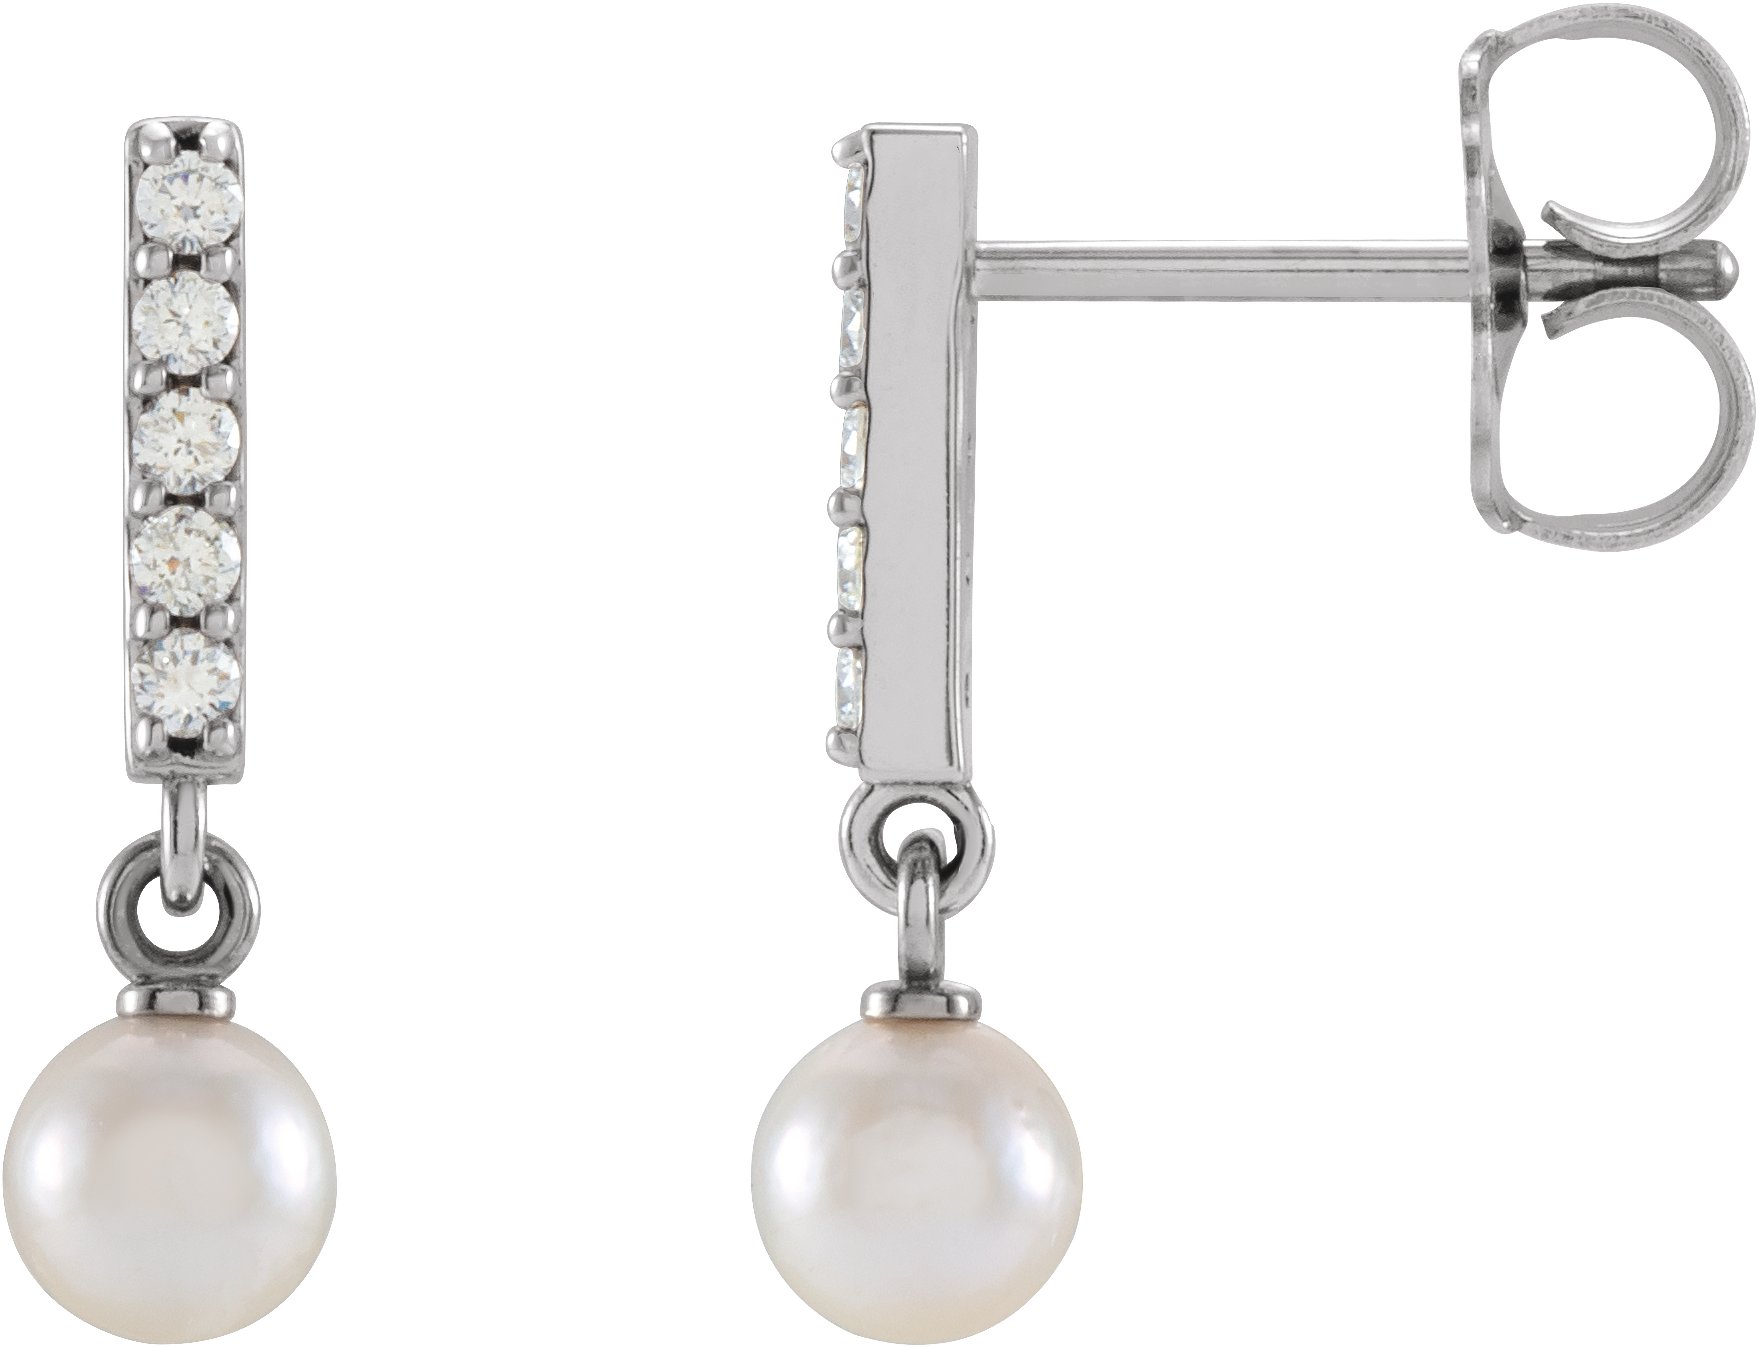 Platinum Bar Earring Mounting for 4 mm Pearl